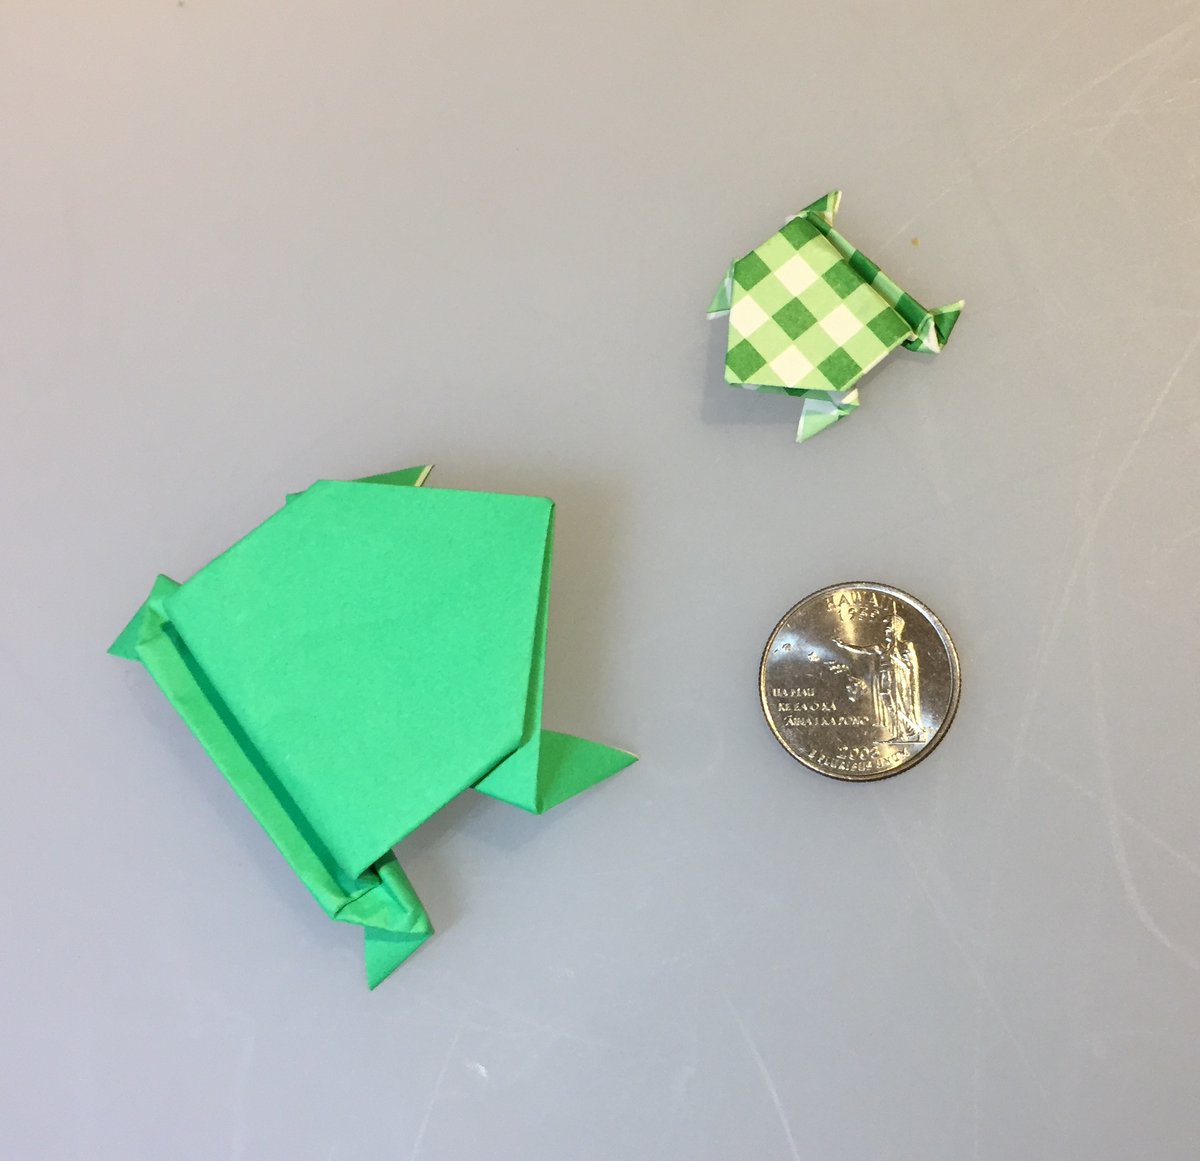 8. If you want to do what Ali did you’ll need to make the box from 15 cm x 15 cm paper and then make the frog from smaller paper. I used 7.5 cm x 7.5 cm kami. But you could make a frog with 15 cm x 15 cm paper and just use any larger container you have.